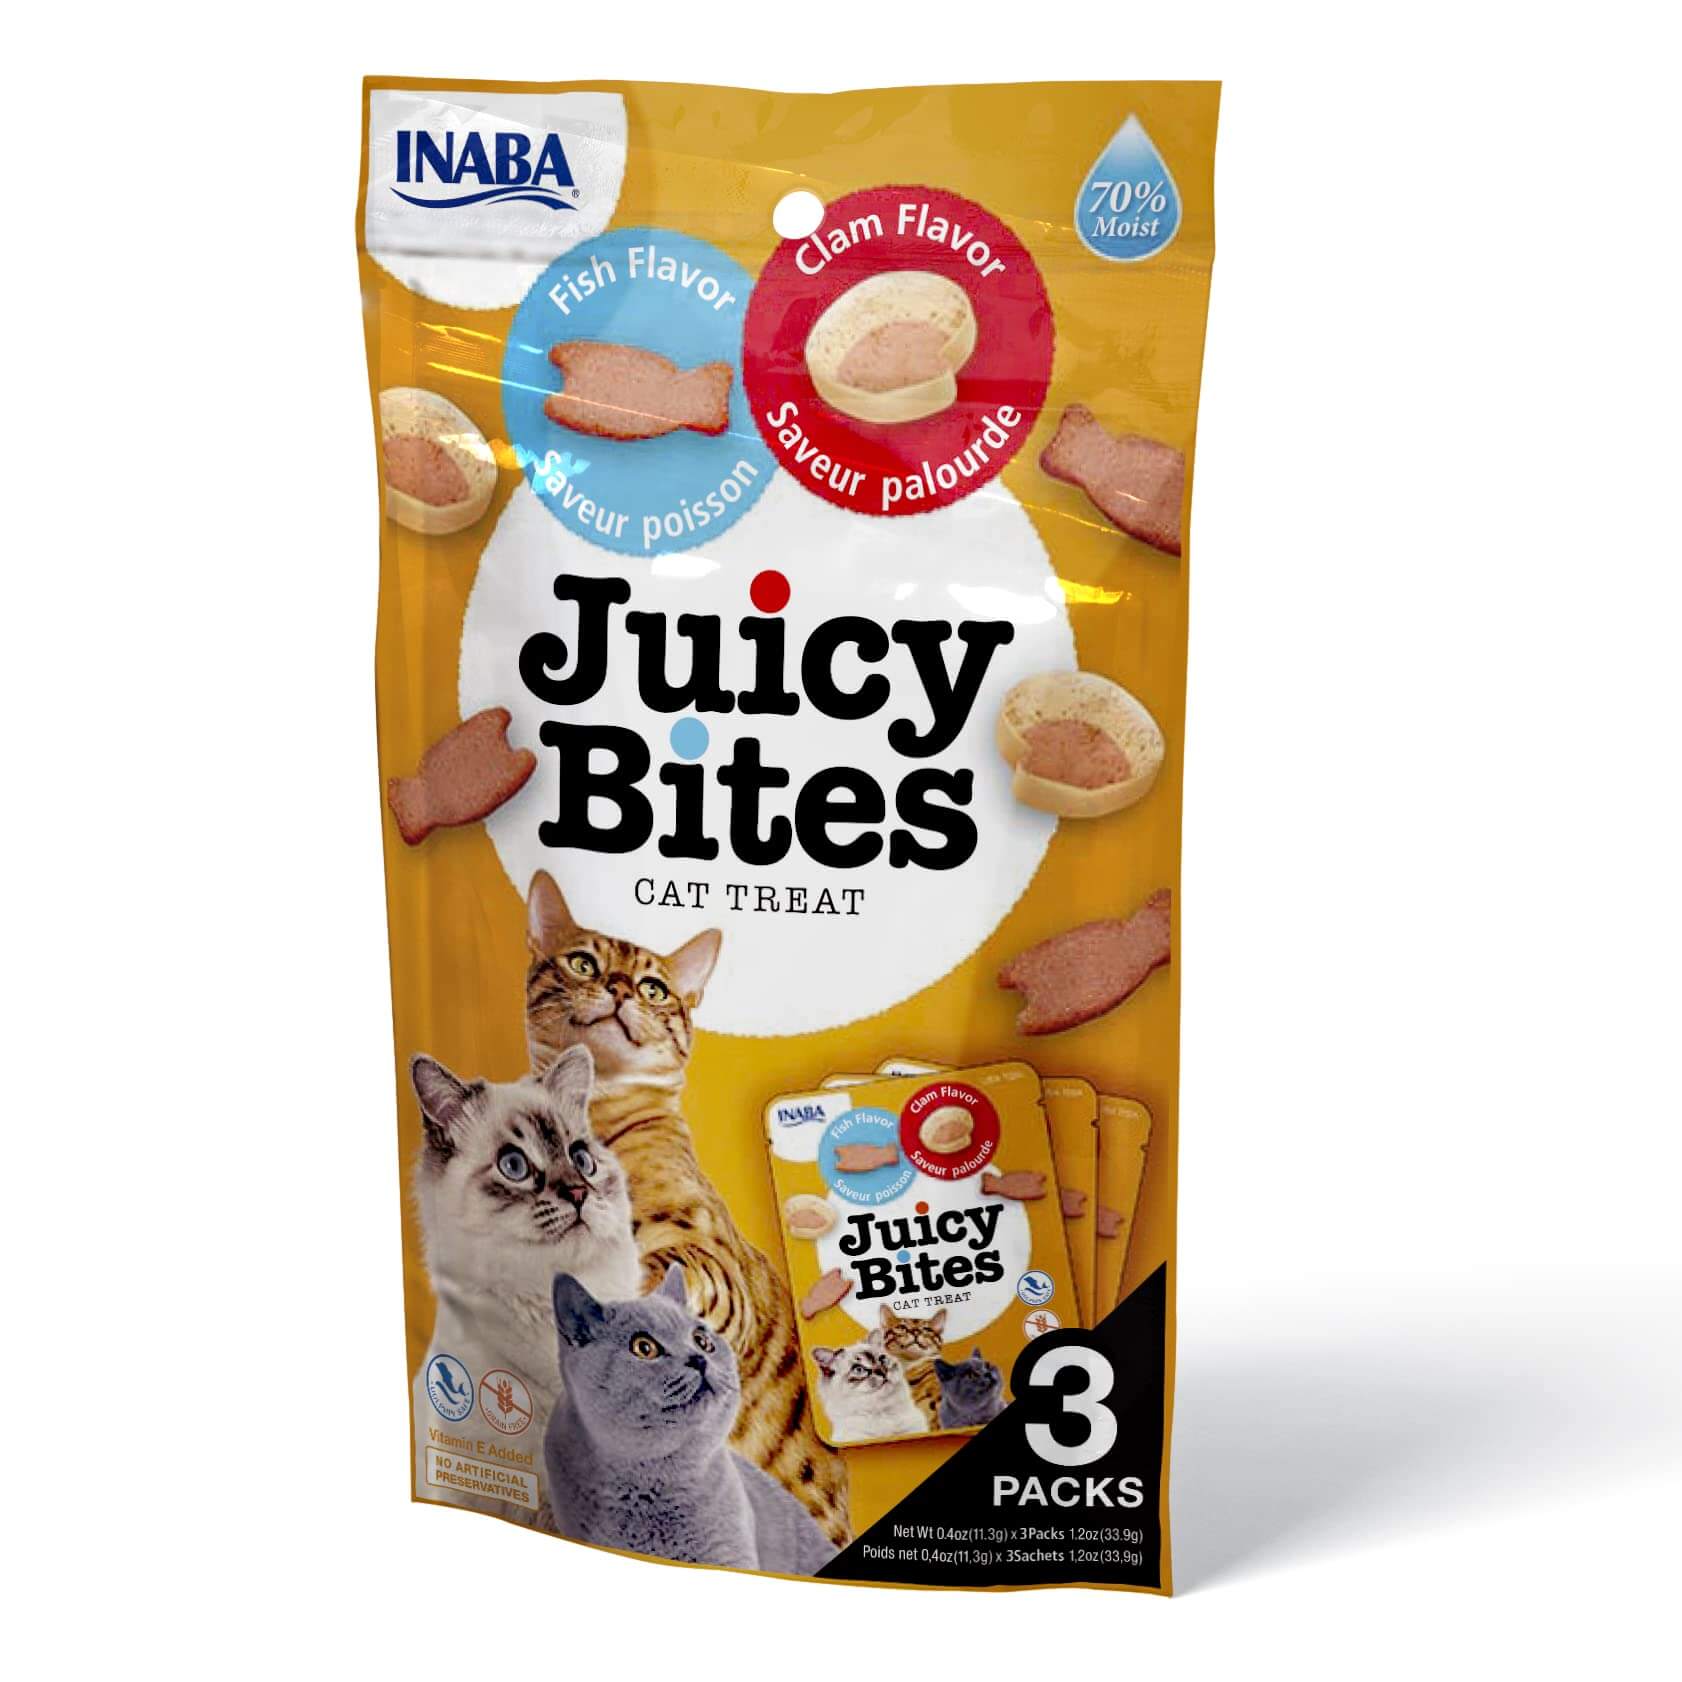 Spoil Your Cat with the Delicious and Nutritious Inaba Juicy Bites插图1